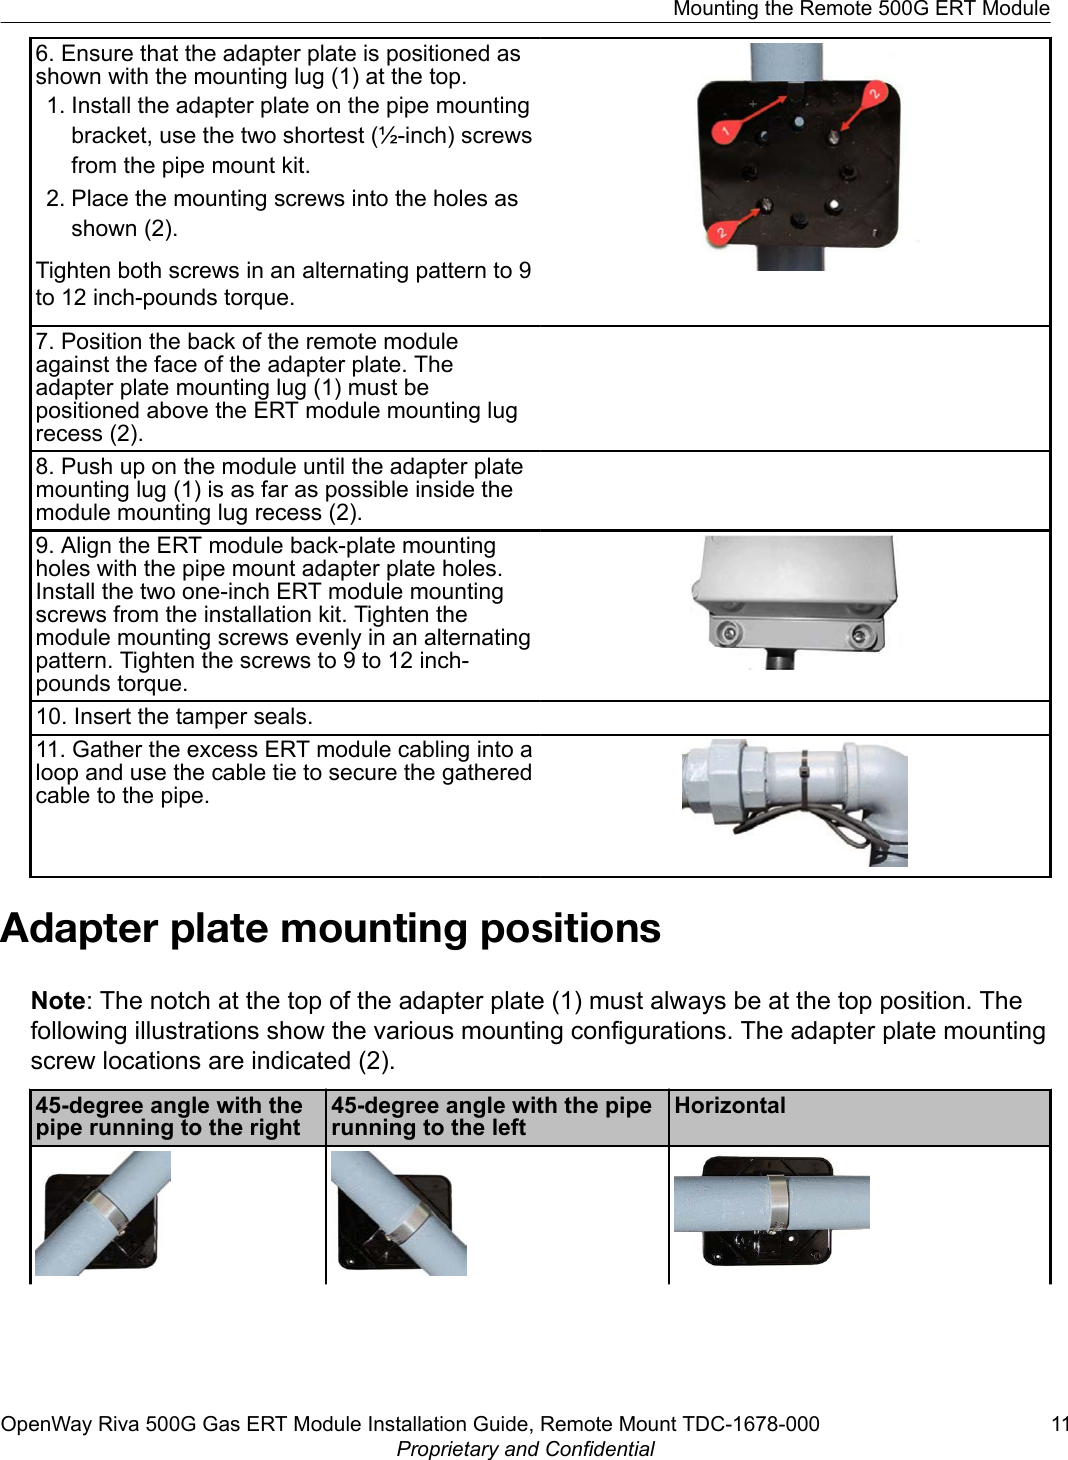 6. Ensure that the adapter plate is positioned asshown with the mounting lug (1) at the top.1. Install the adapter plate on the pipe mountingbracket, use the two shortest (½-inch) screwsfrom the pipe mount kit.2. Place the mounting screws into the holes asshown (2).Tighten both screws in an alternating pattern to 9to 12 inch-pounds torque.7. Position the back of the remote moduleagainst the face of the adapter plate. Theadapter plate mounting lug (1) must bepositioned above the ERT module mounting lugrecess (2).8. Push up on the module until the adapter platemounting lug (1) is as far as possible inside themodule mounting lug recess (2).9. Align the ERT module back-plate mountingholes with the pipe mount adapter plate holes.Install the two one-inch ERT module mountingscrews from the installation kit. Tighten themodule mounting screws evenly in an alternatingpattern. Tighten the screws to 9 to 12 inch-pounds torque.10. Insert the tamper seals.11. Gather the excess ERT module cabling into aloop and use the cable tie to secure the gatheredcable to the pipe.Adapter plate mounting positionsNote: The notch at the top of the adapter plate (1) must always be at the top position. Thefollowing illustrations show the various mounting configurations. The adapter plate mountingscrew locations are indicated (2).45-degree angle with thepipe running to the right45-degree angle with the piperunning to the leftHorizontalMounting the Remote 500G ERT ModuleOpenWay Riva 500G Gas ERT Module Installation Guide, Remote Mount TDC-1678-000 11Proprietary and Confidential